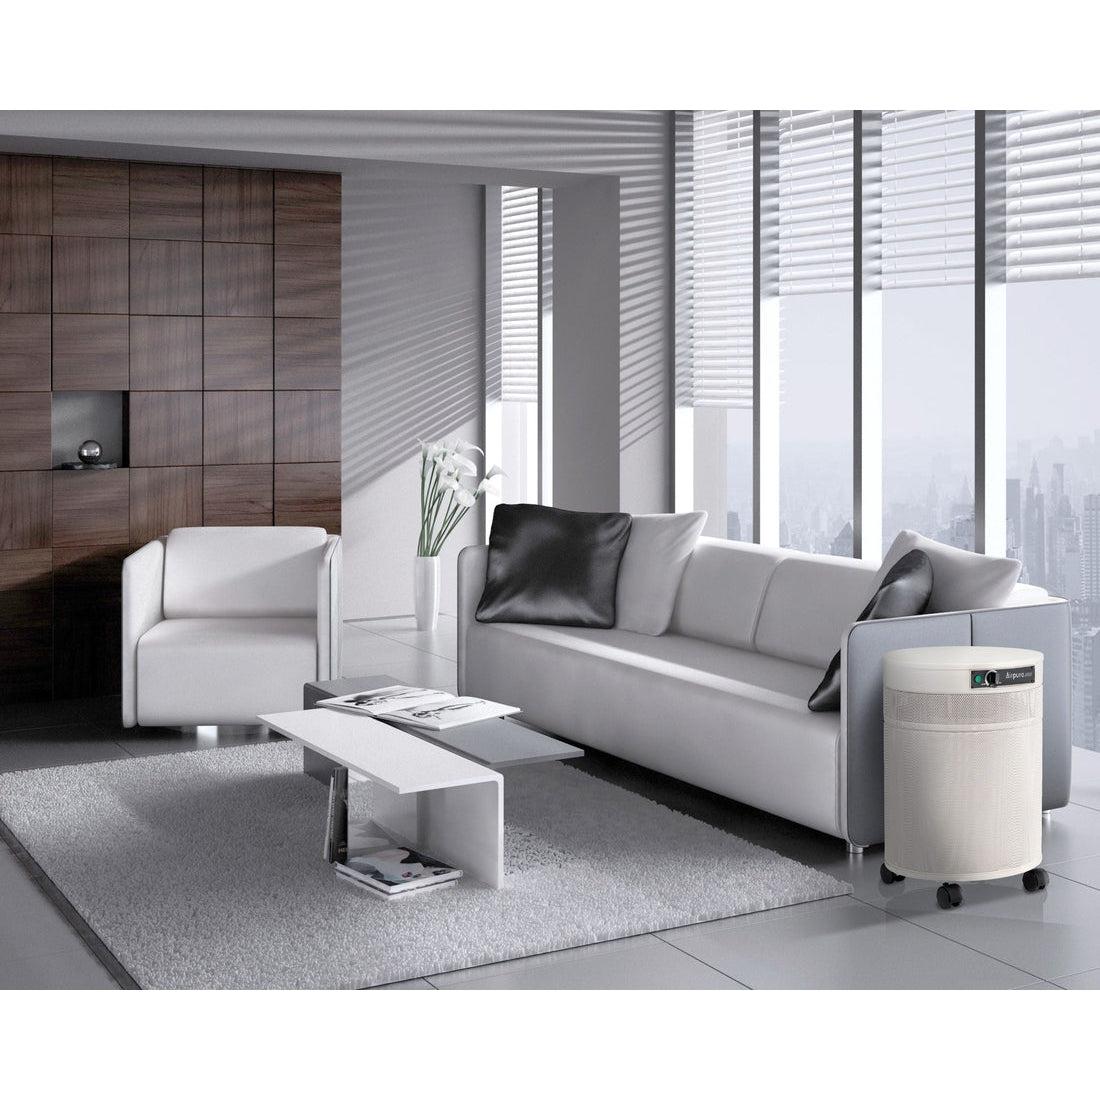 Airpura F700 Air Purifier - Purely Relaxation